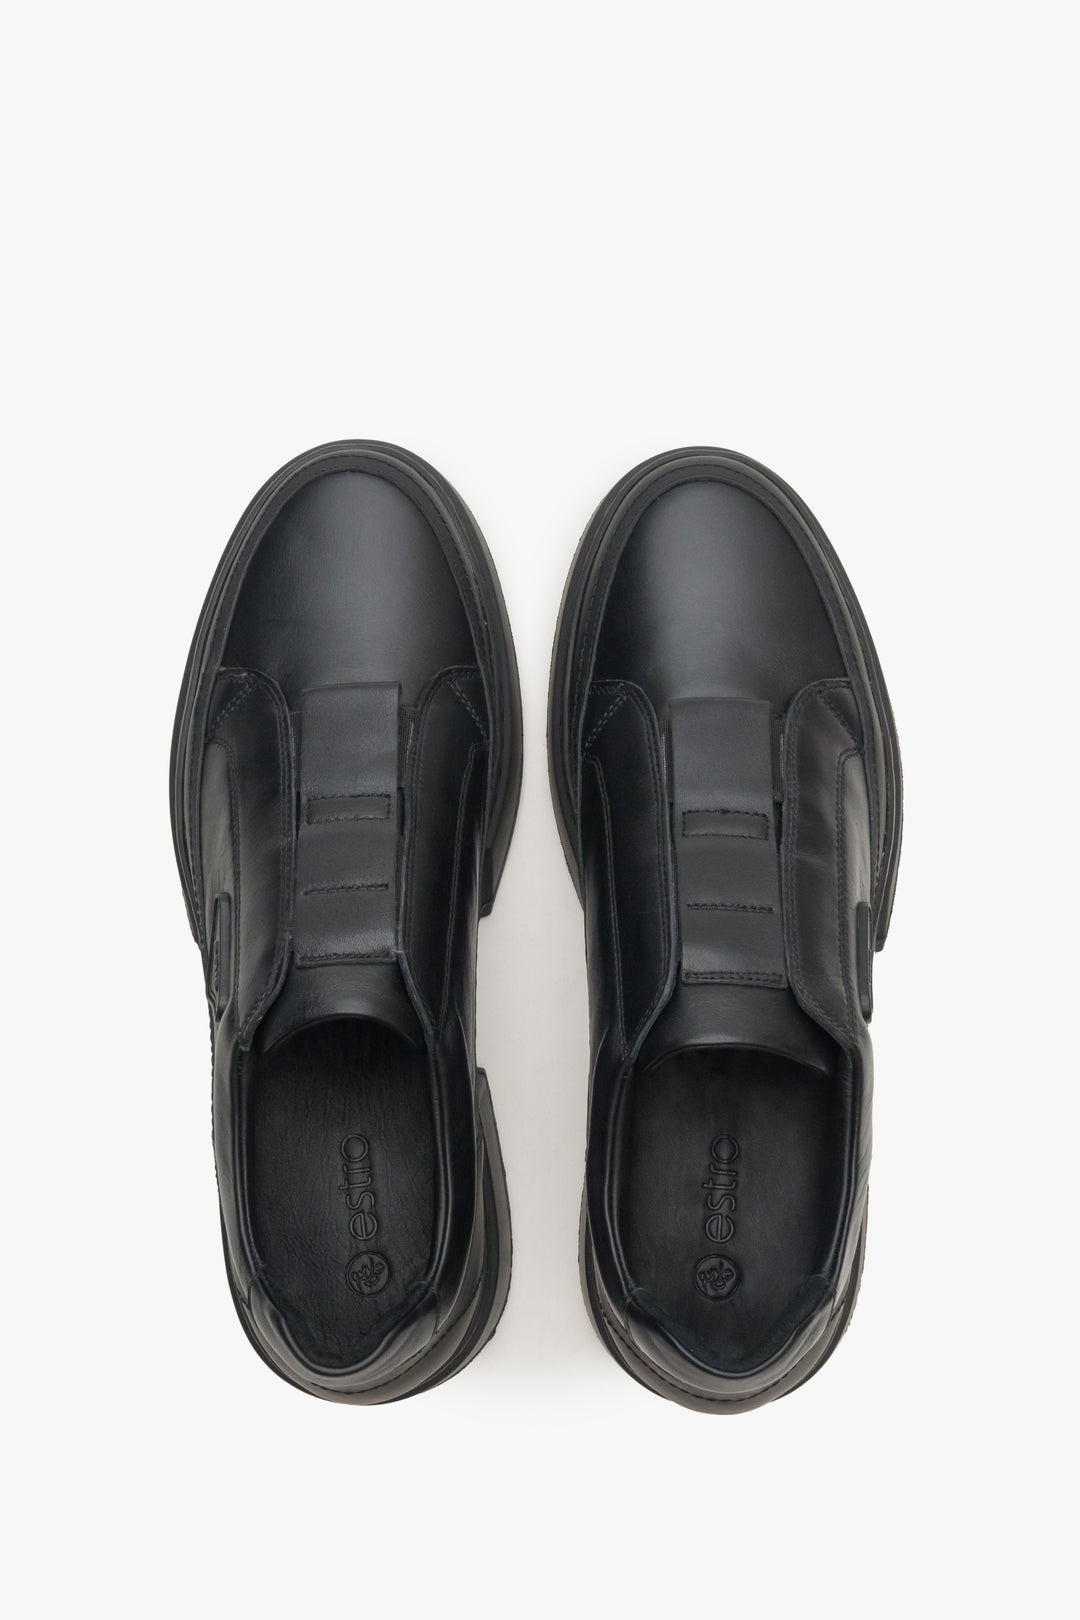 Men's black slip-on sneakers made of genuine leather by Estro - top view presentation of the model.